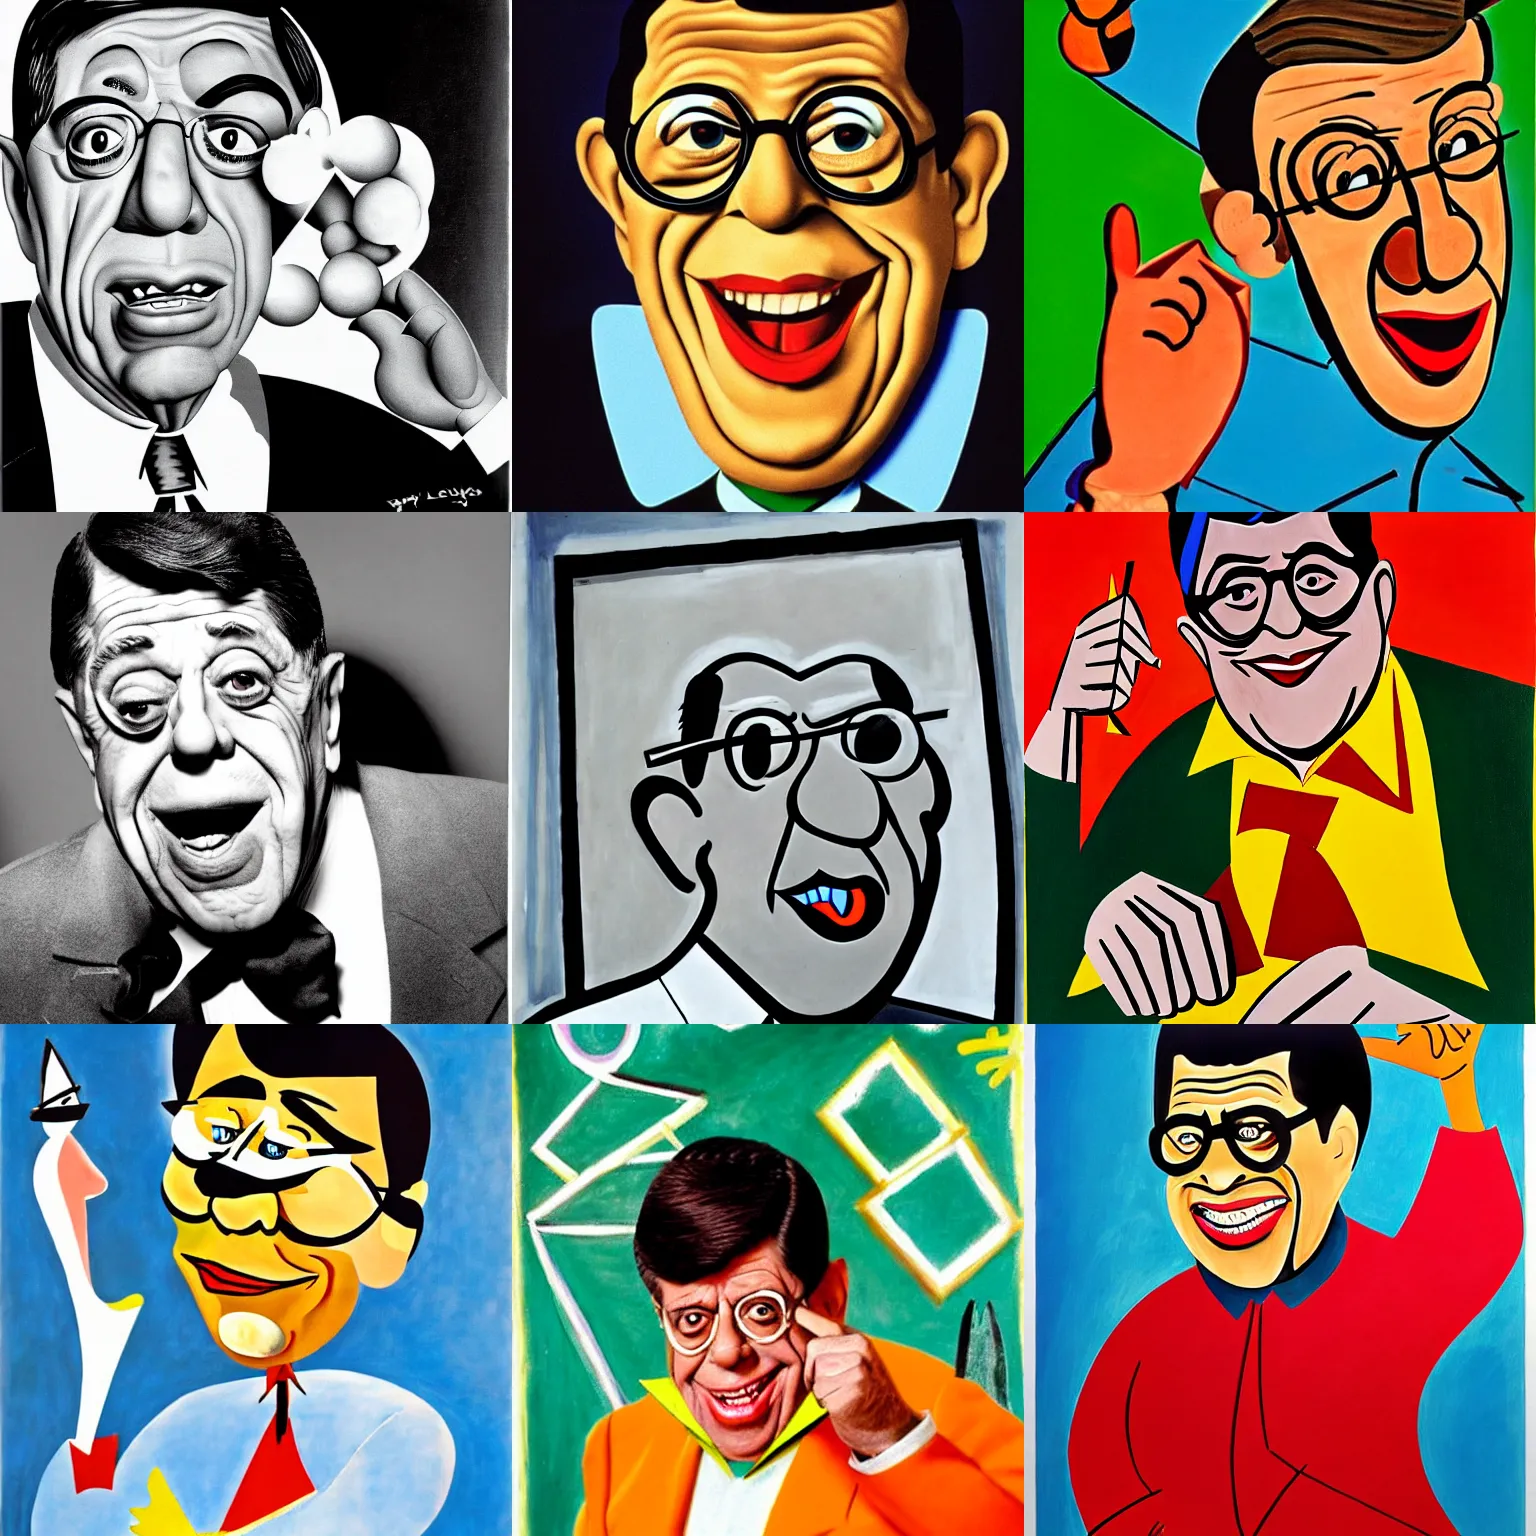 Prompt: Jerry Lewis as Nutty Professor by Pablo Picasso